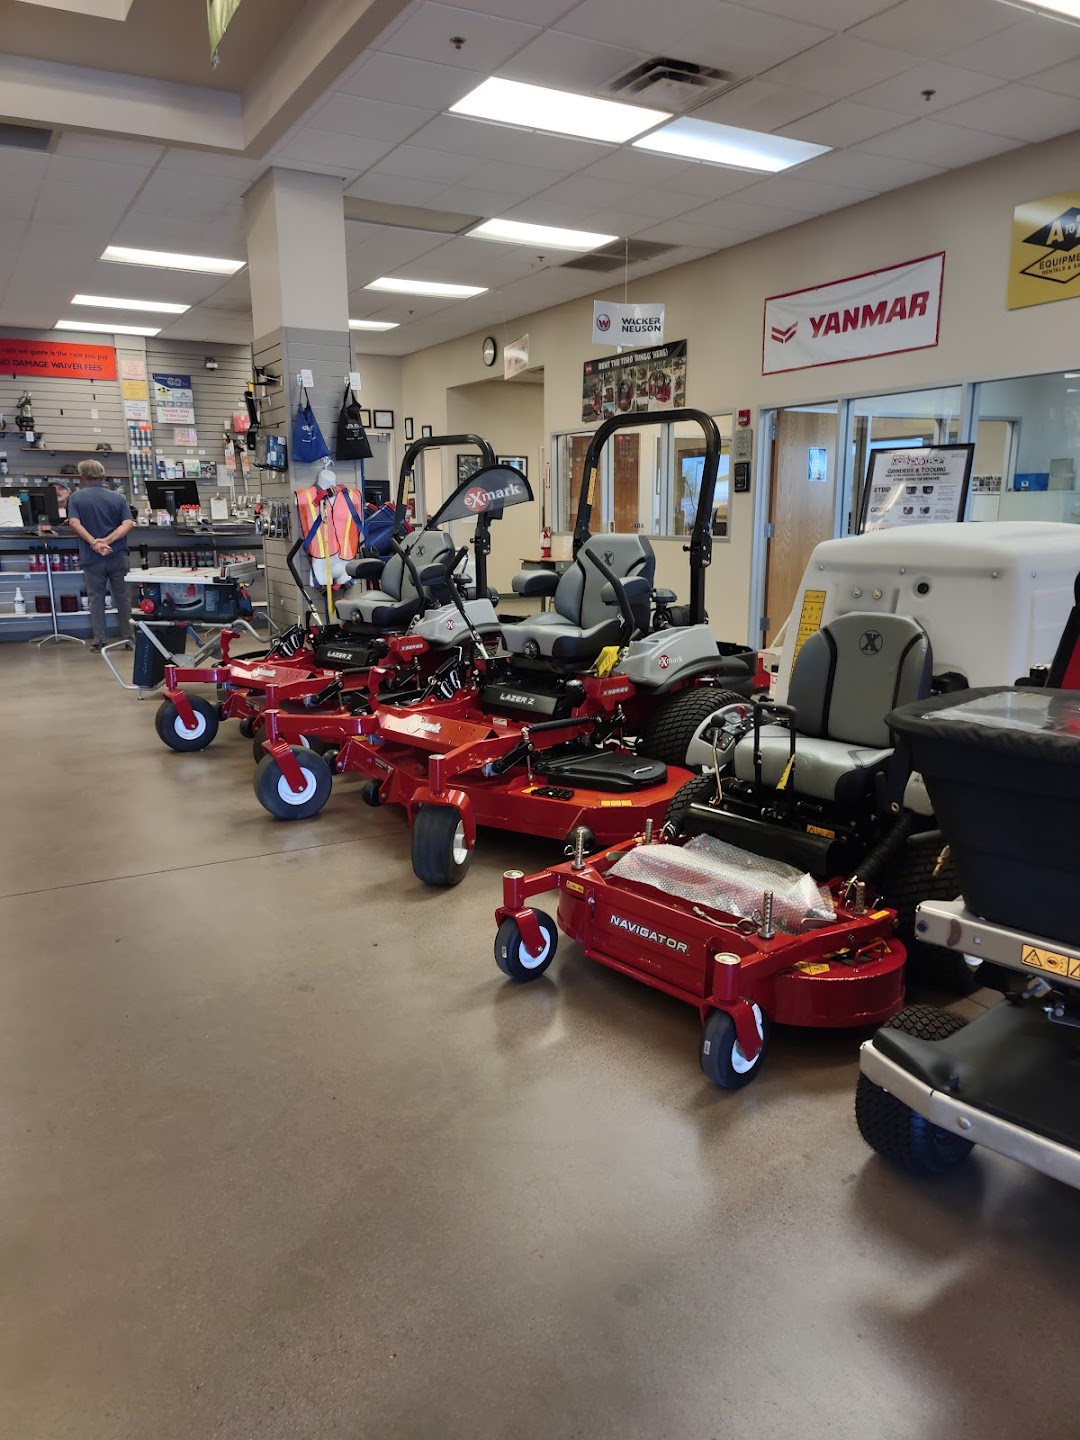 A To Z Equipment Rentals & Sales